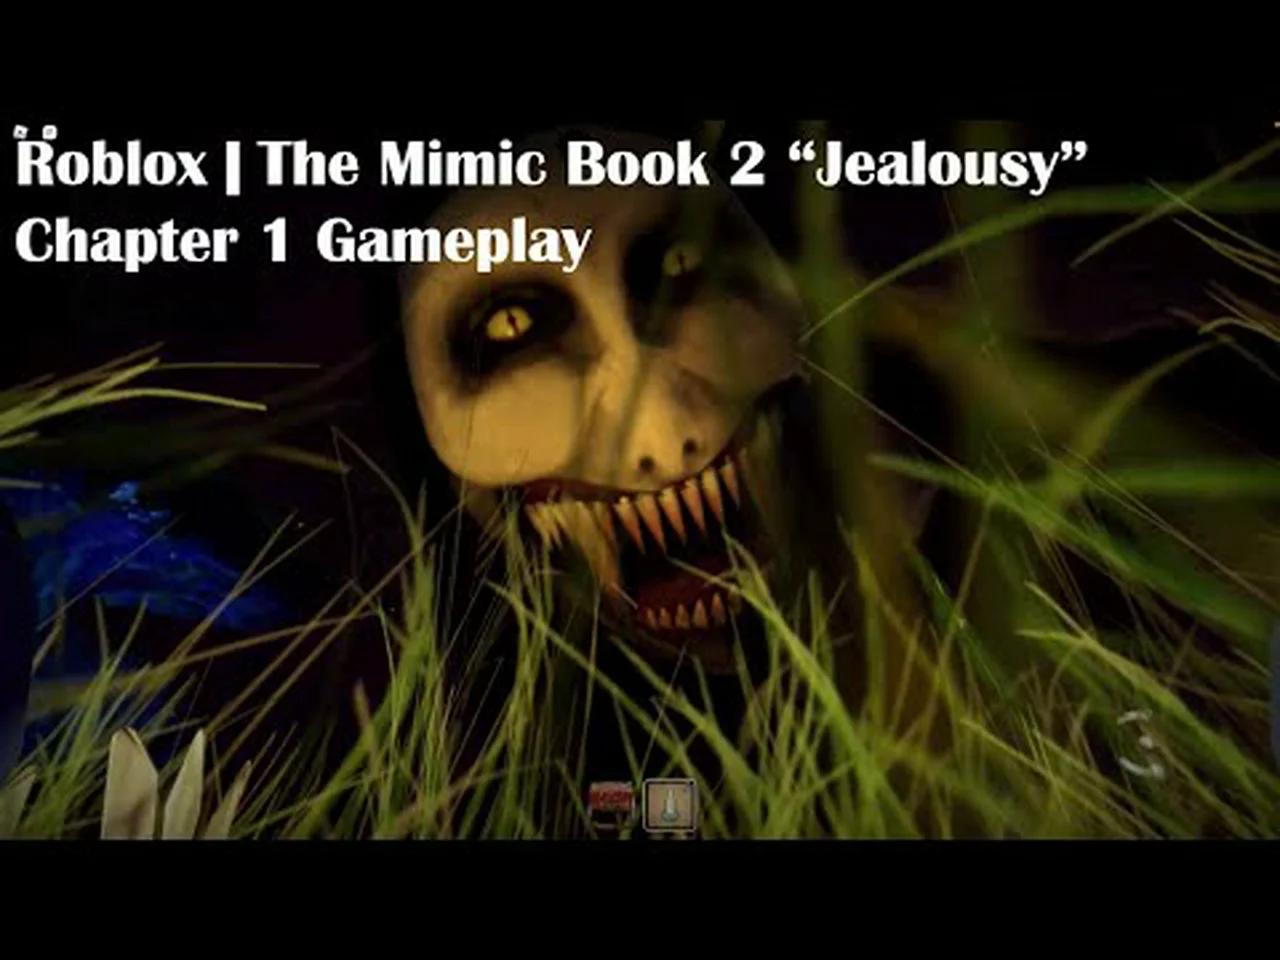 The Mimic, Book 1 Chapter 2